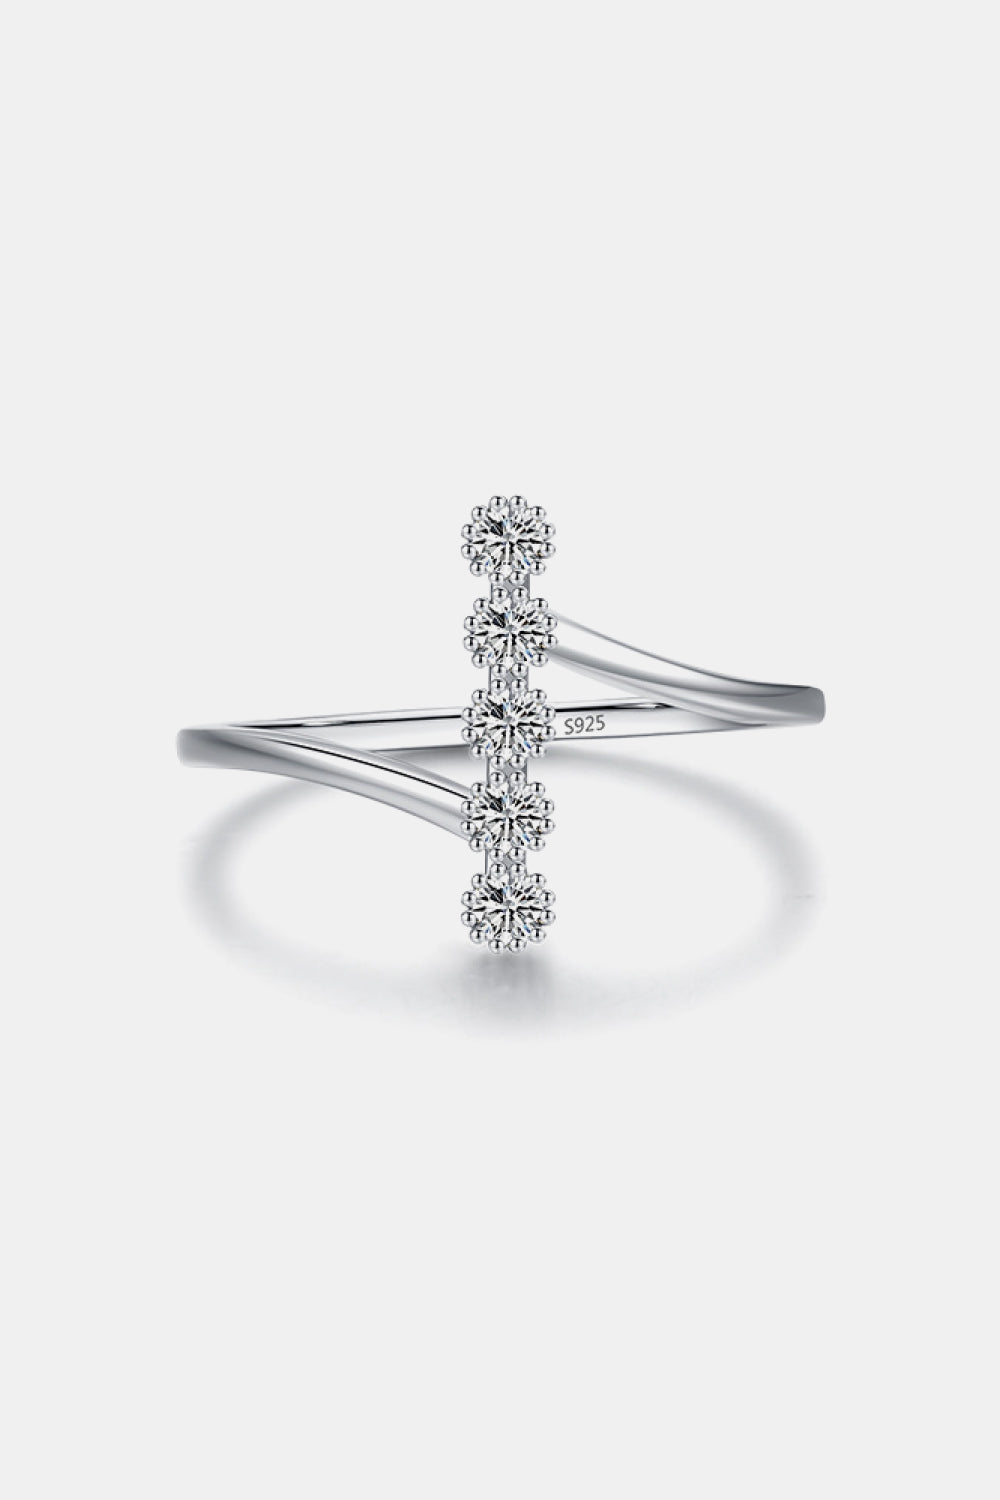 925 Sterling Silver Five Zircon Stones Ring, Sterling silver ring, Five zircon stone ring, Elegant jewelry, Sparkling centerpiece, Fine silver accessory, High-quality craftsmanship, Timeless beauty, Fashionable ring, Statement piece, Affordable luxury.